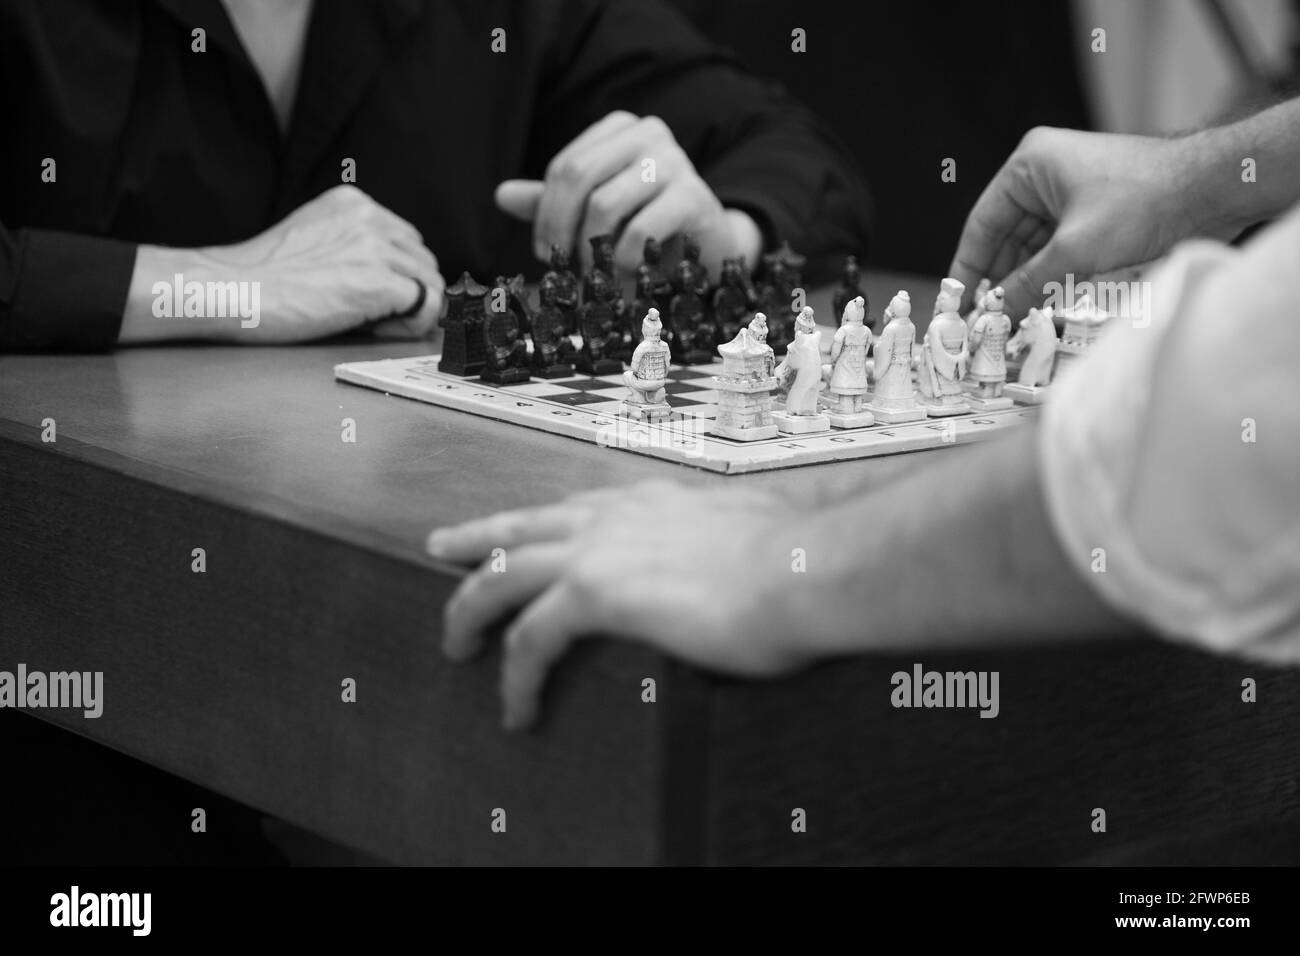 Grayscale shot of two people hands playing chess on the table Stock Photo